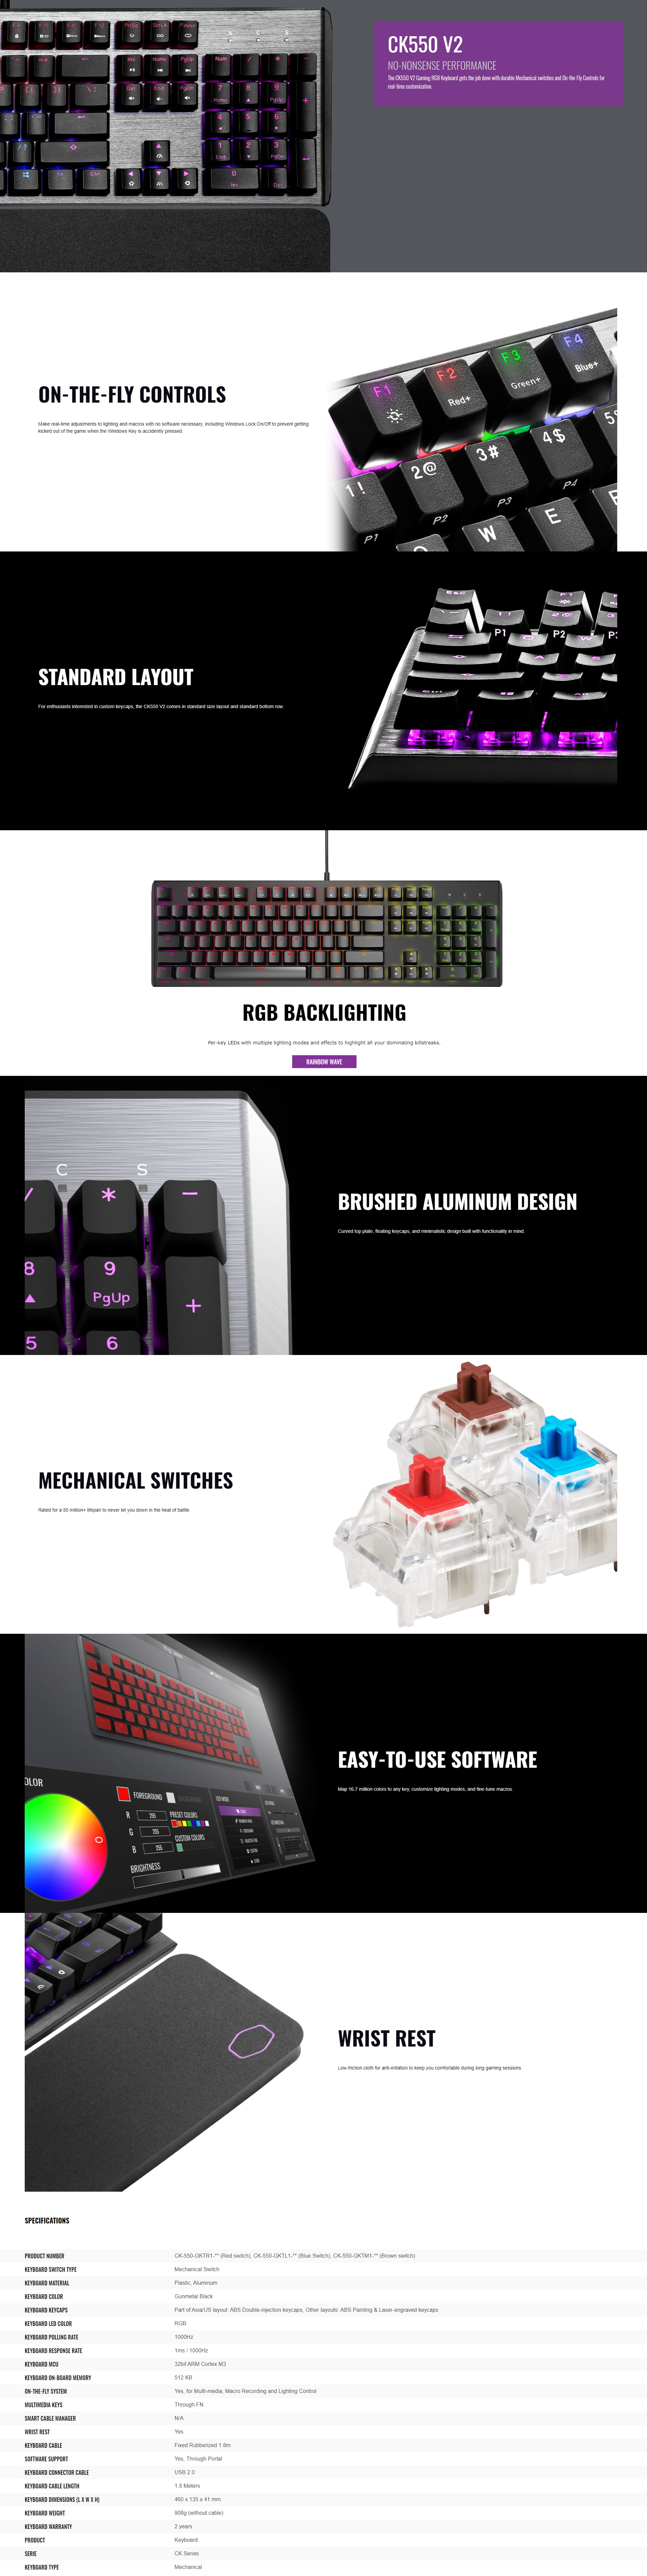 Cooler Master Ck550 V2 Gaming Keyboard Blue Switch At Best Price Ezpz Solutions